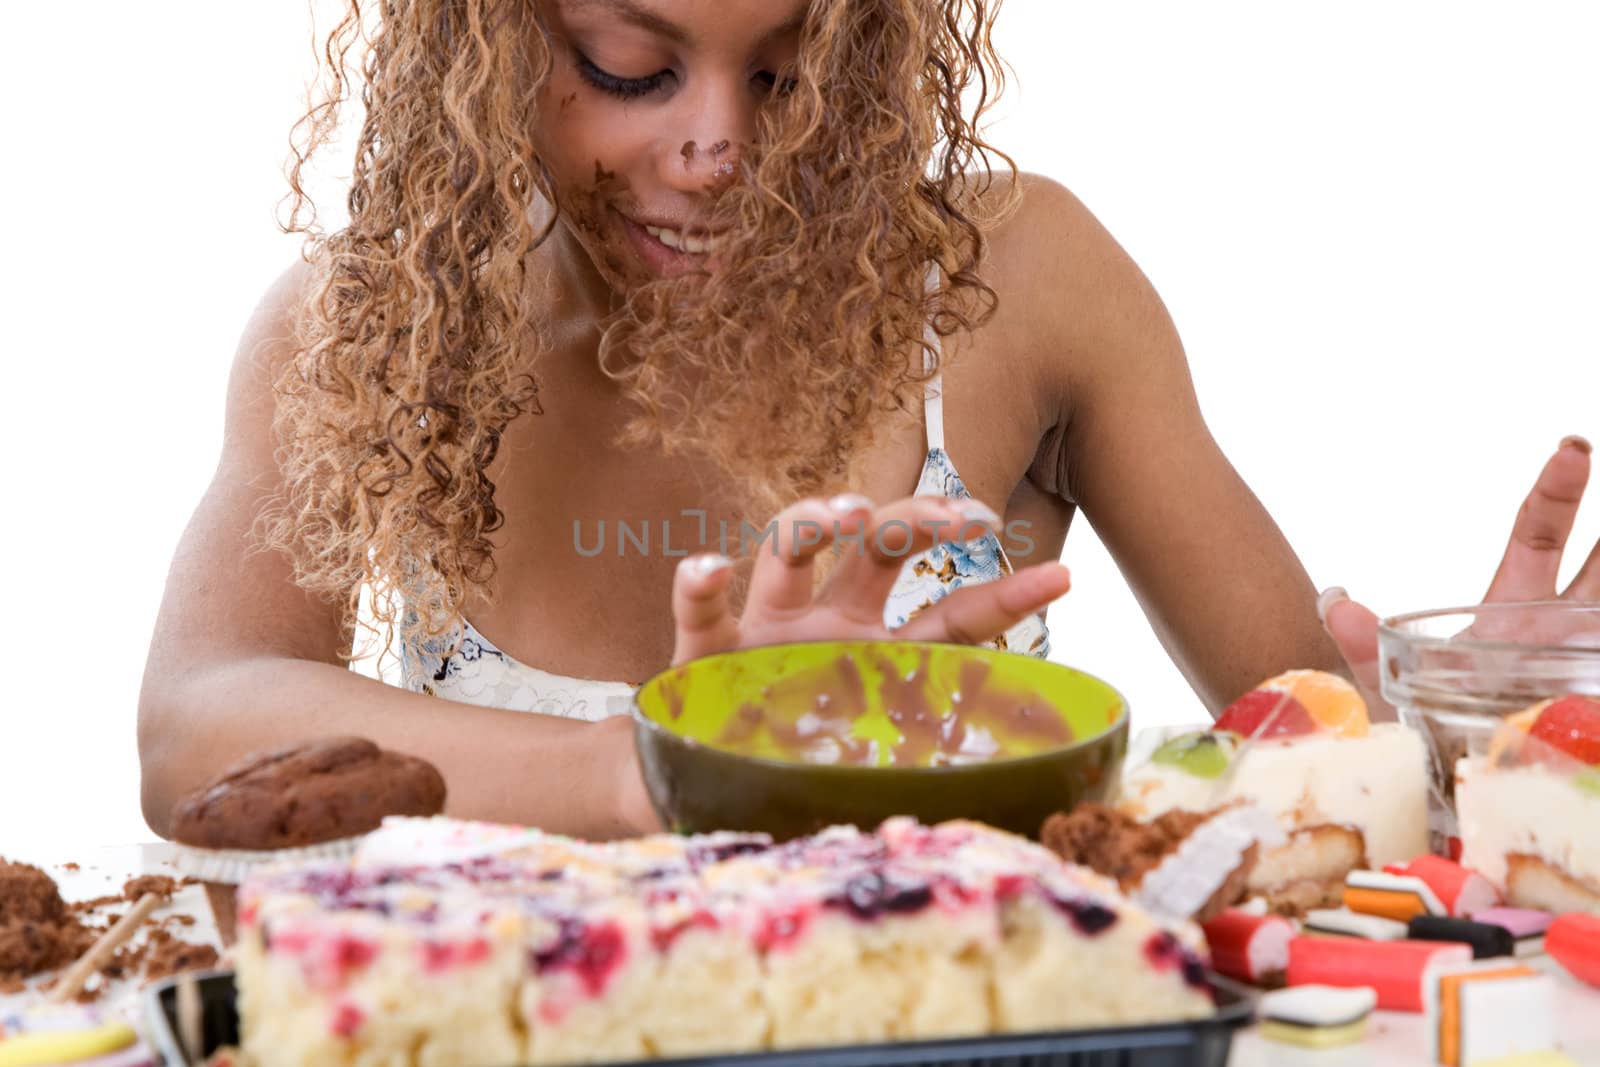 Pretty black girl pushing away the food she has just been devouring